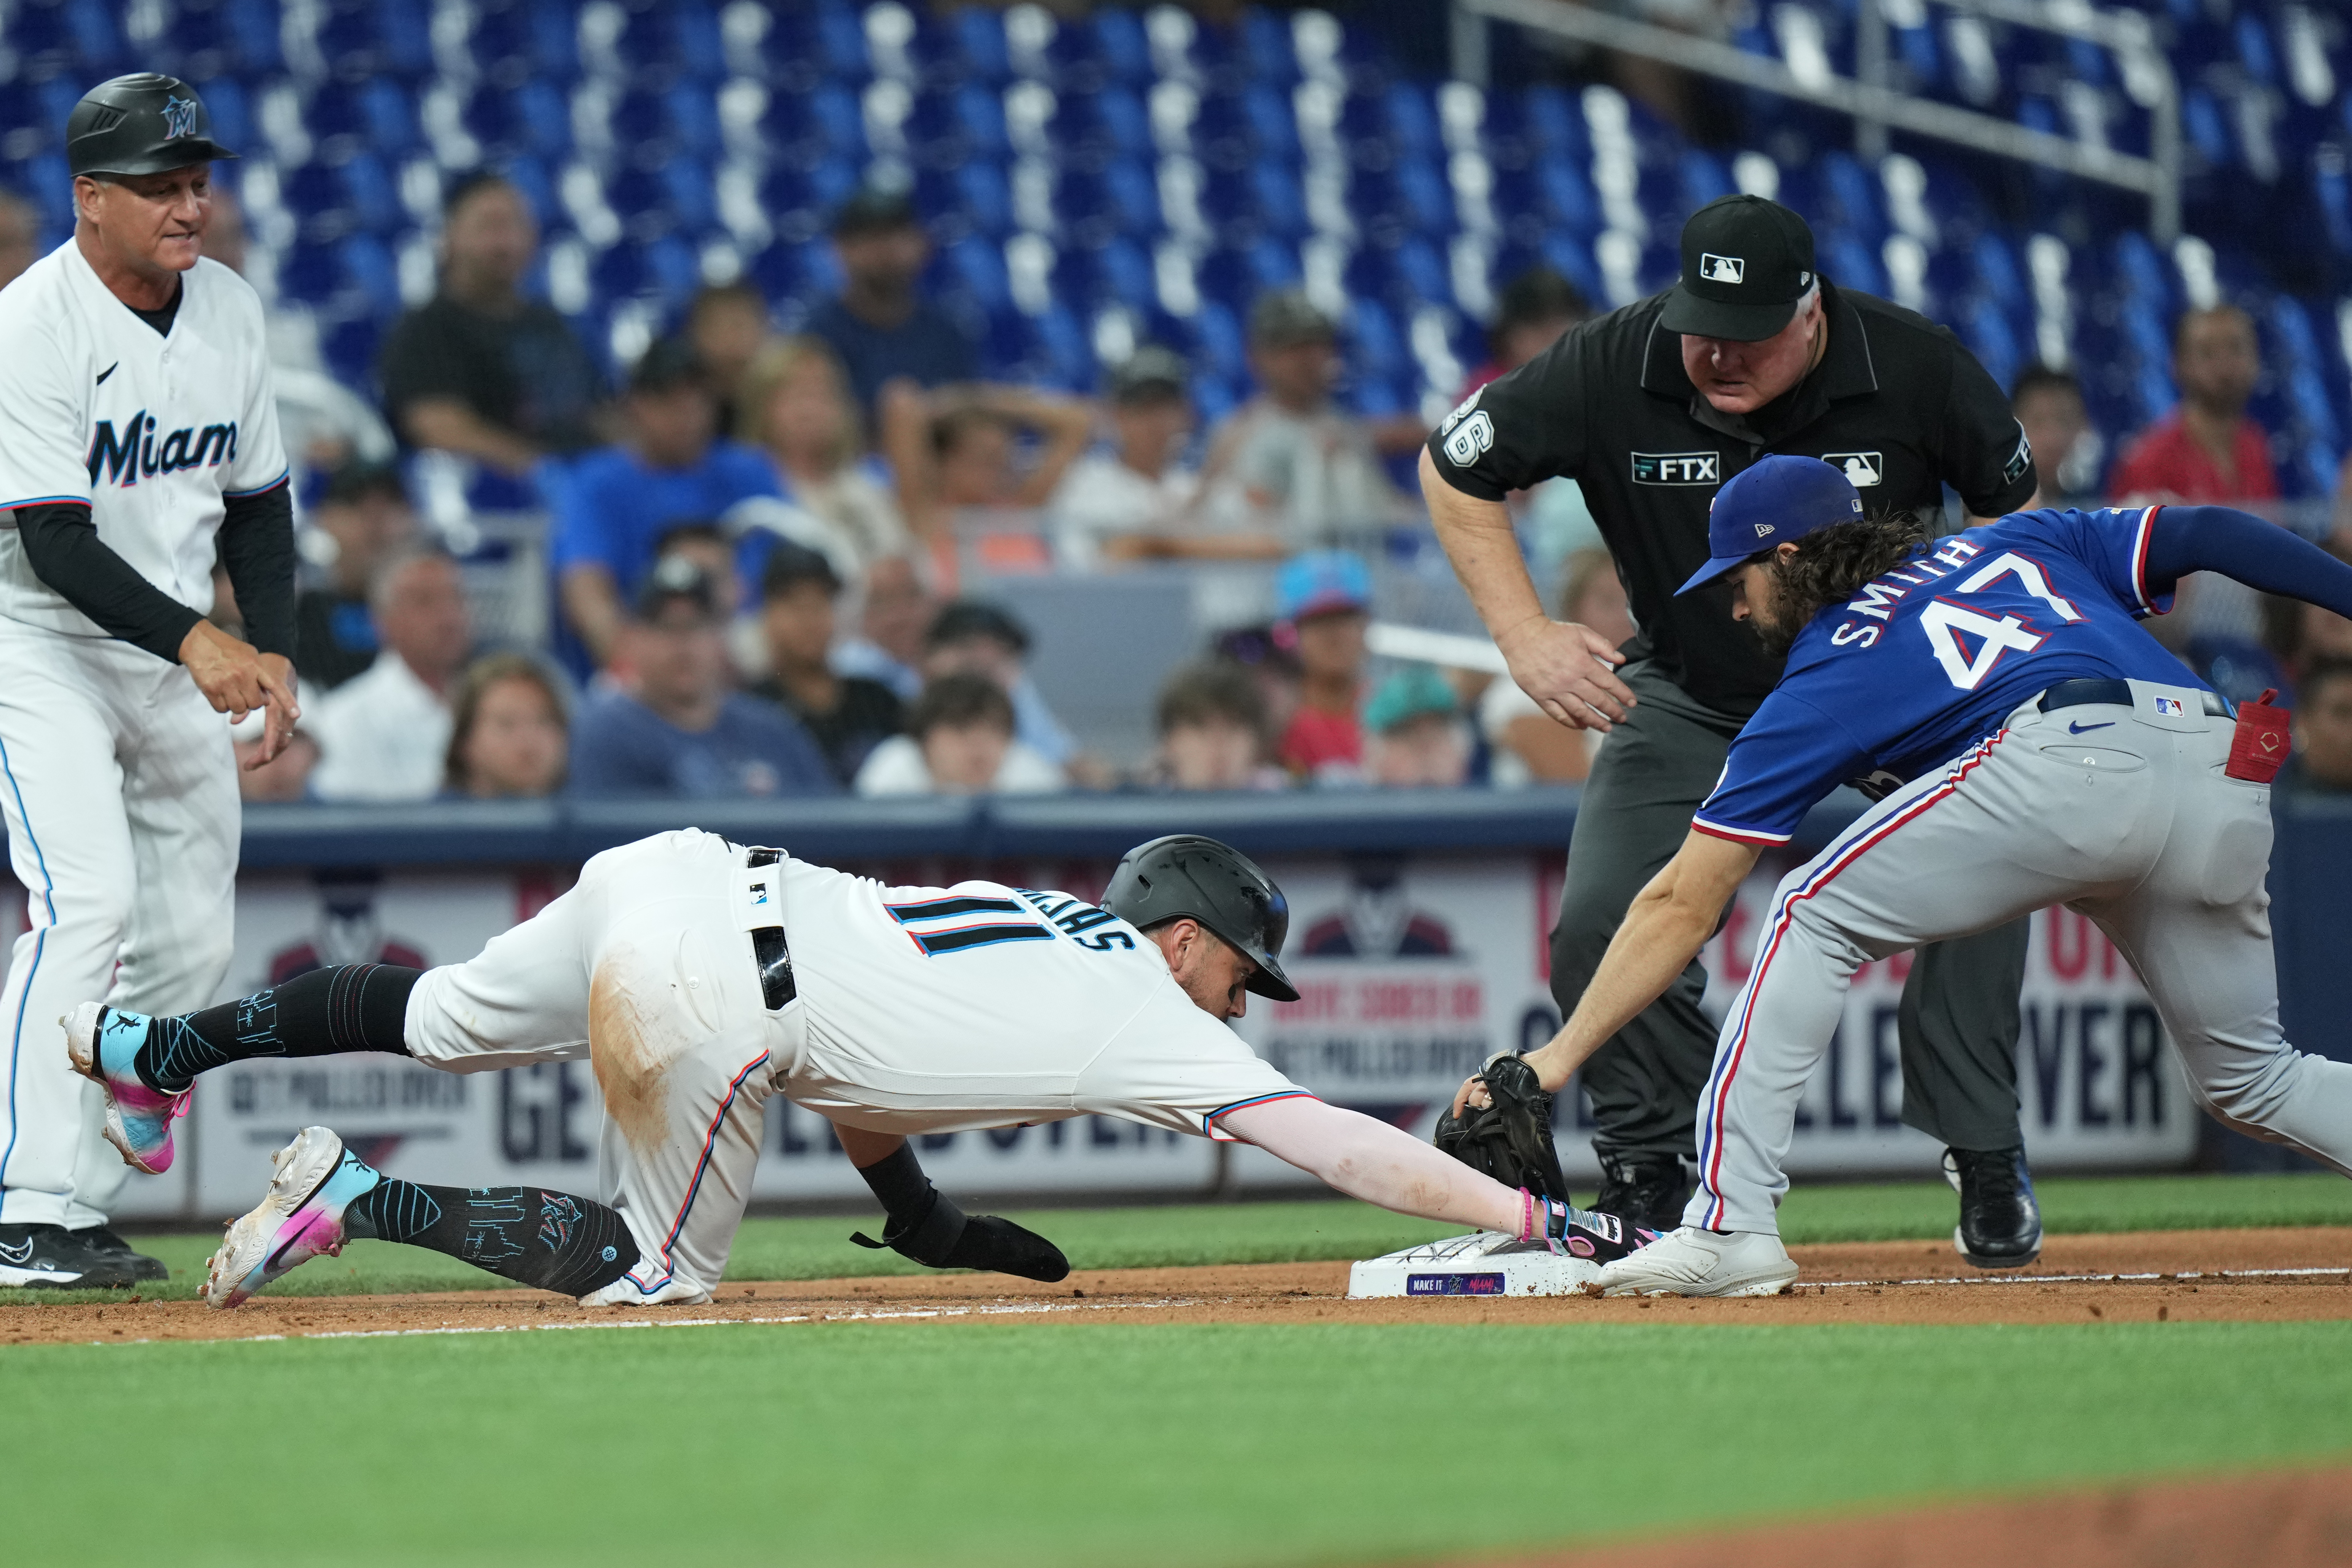 Miami Marlins shortstop Miguel Rojas (11) just beats the tag from Texas Rangers third baseman Josh Smith (47) as the third base umpire watches the play during the game between the Texas Rangers and the Miami Marlins on Tuesday, July 21, 2022 at LoanDepot Park in Miami, FL